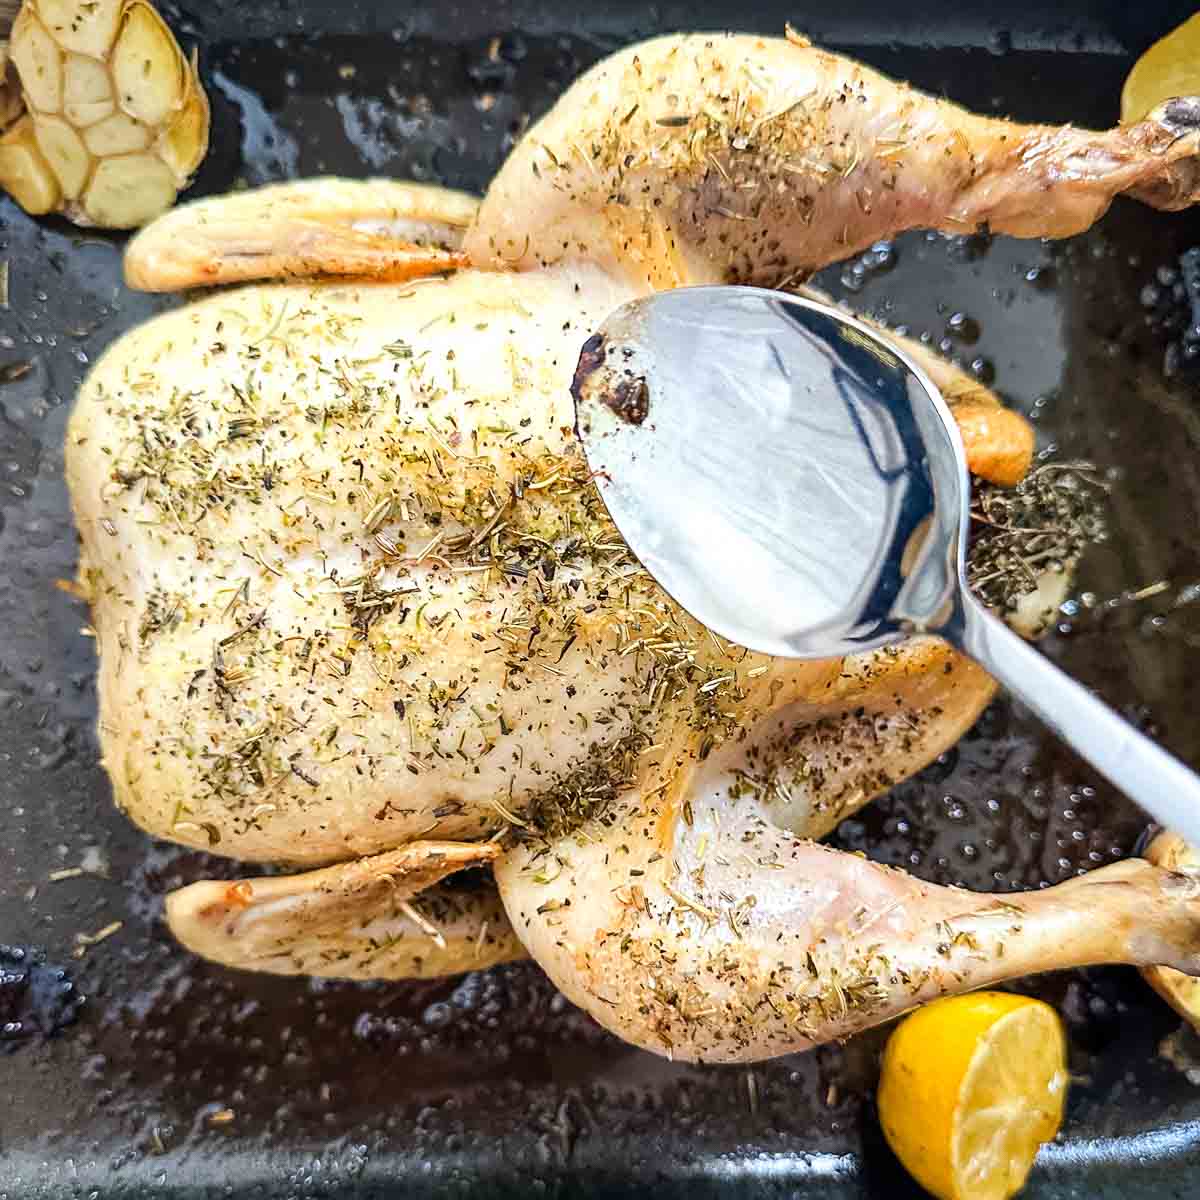 A spoon basting a roasted chicken in a pan with lemons and herbs.